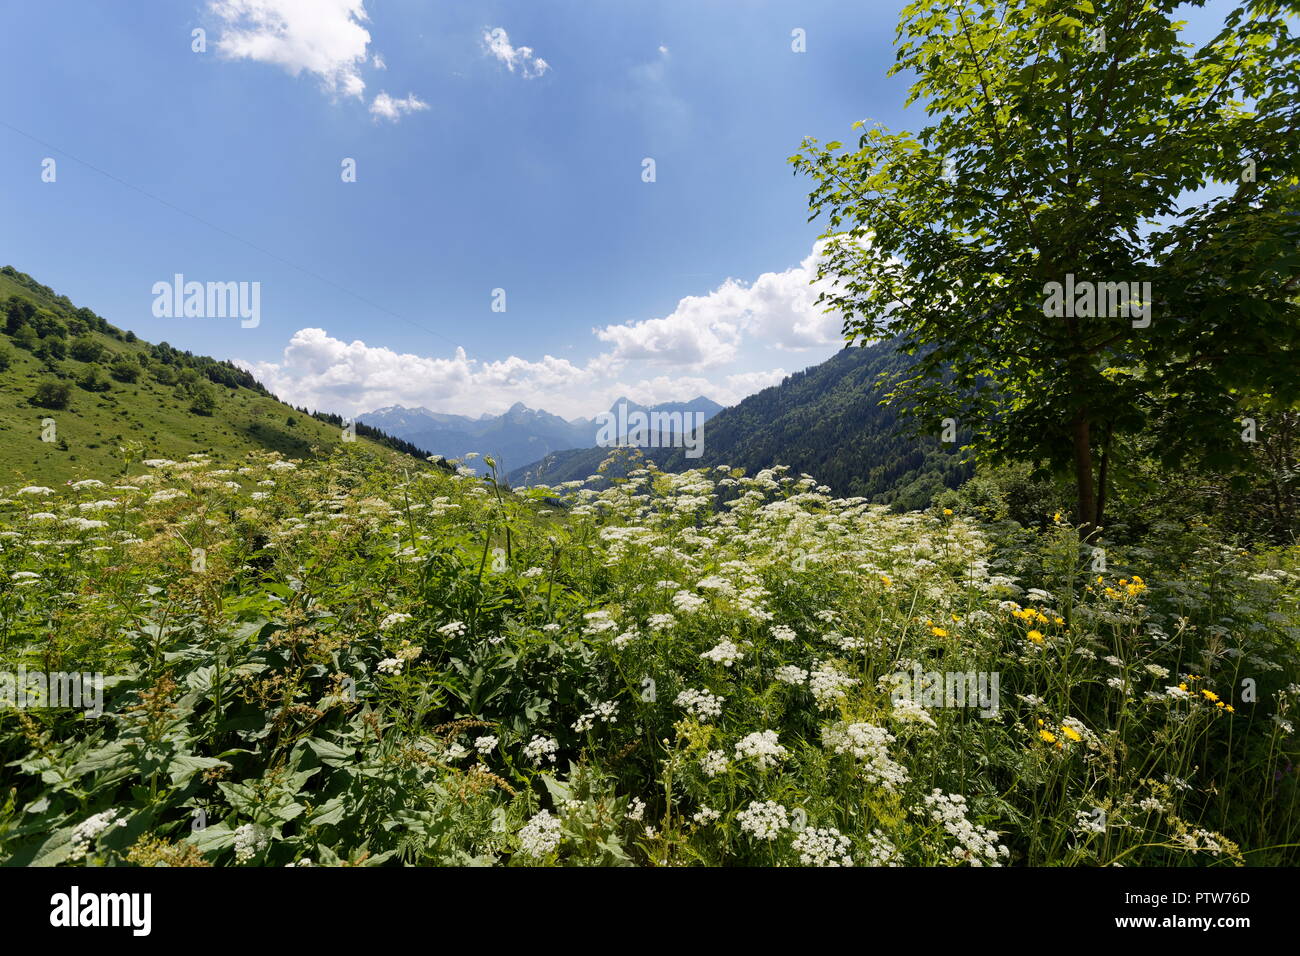 Meadow flowers in full bloom in the foreground on the hills around Col de la Forclaz France Stock Photo